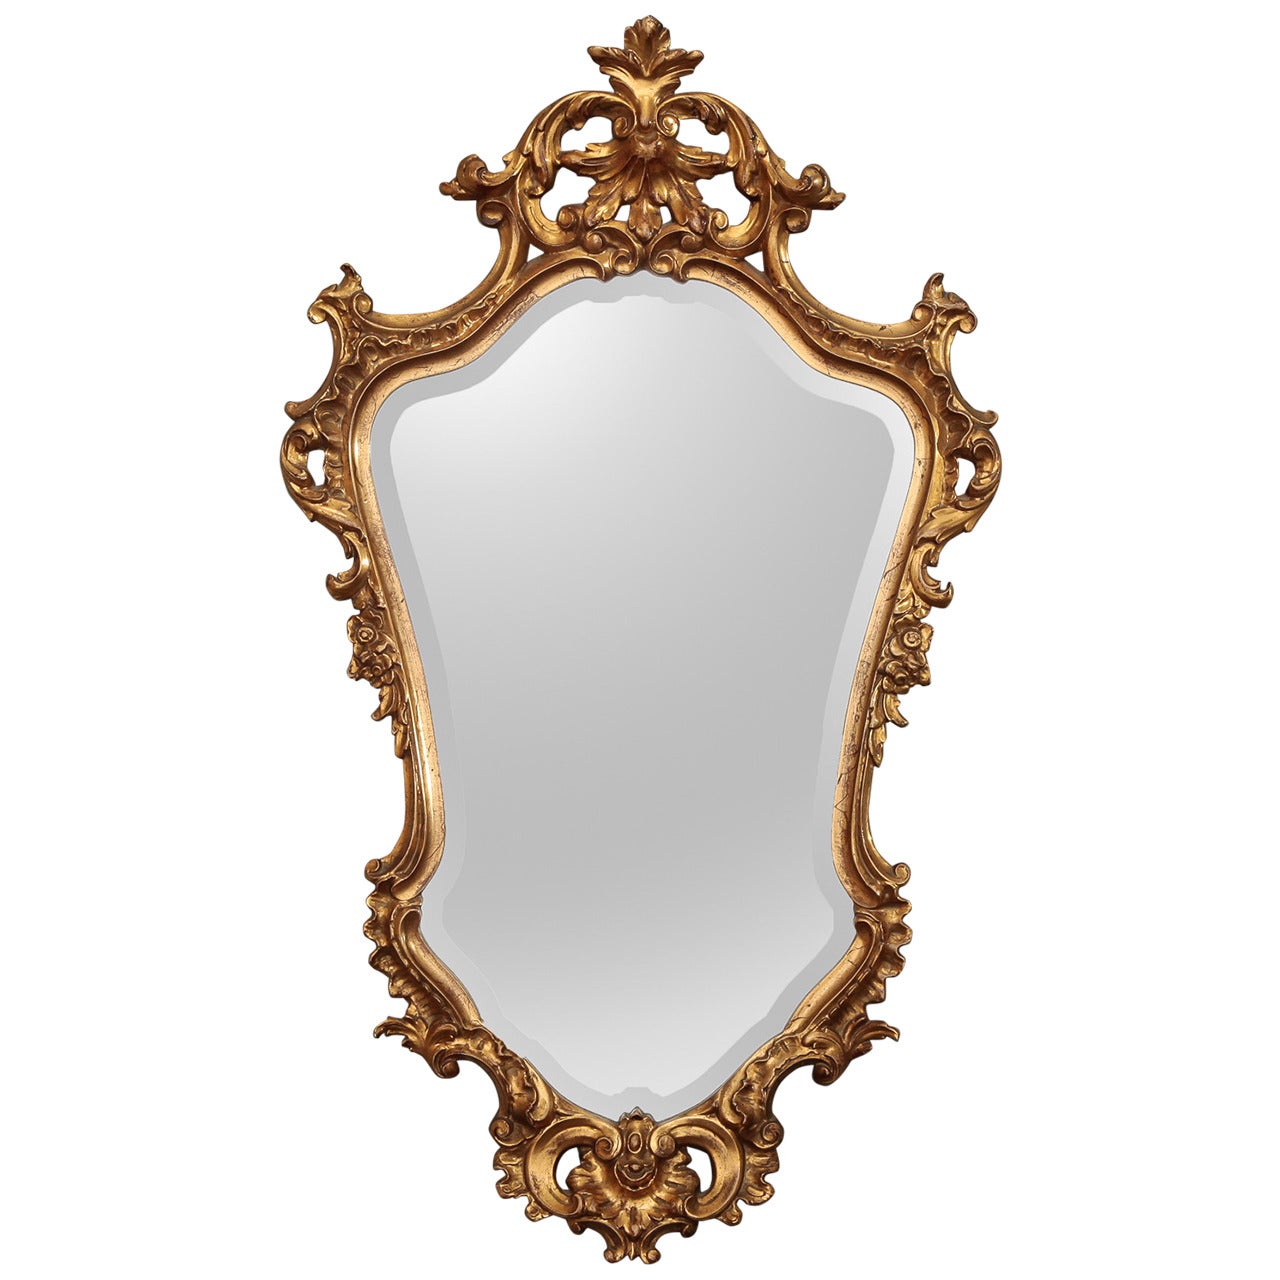 Gilt Resin Carved French Mirror